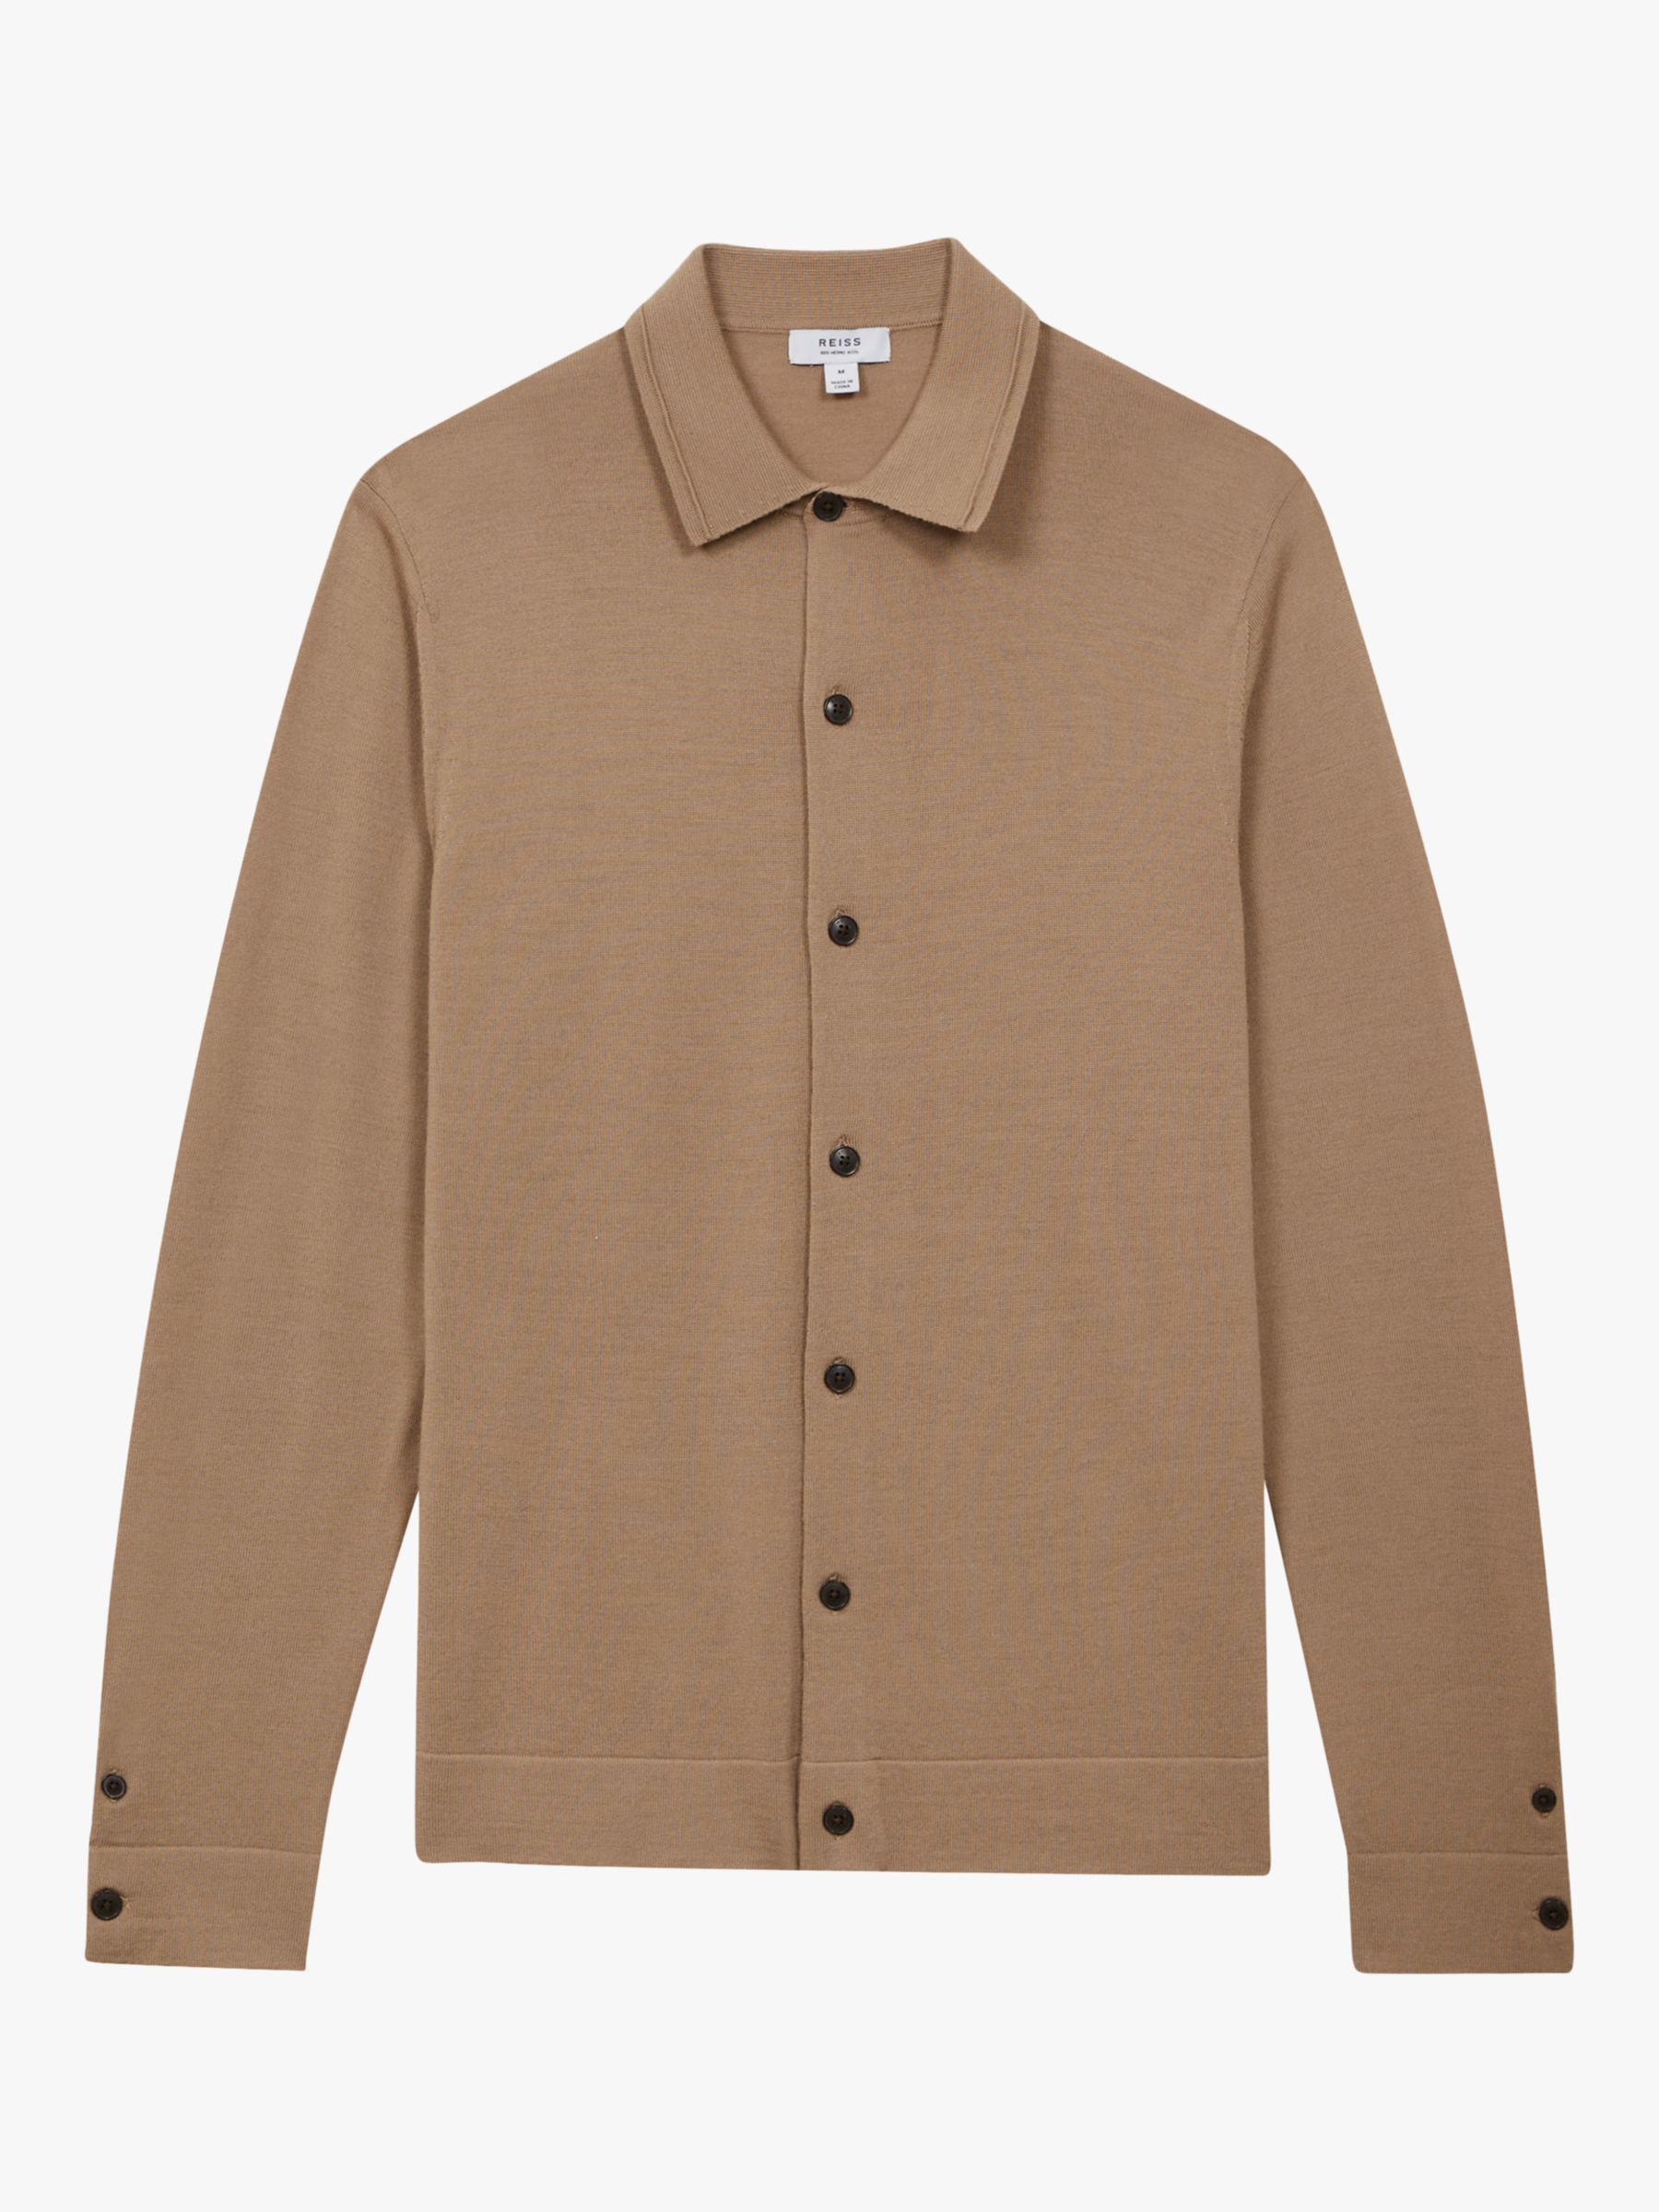 Reiss Forbes Long Sleeve Button Through Cardigan, Camel, S